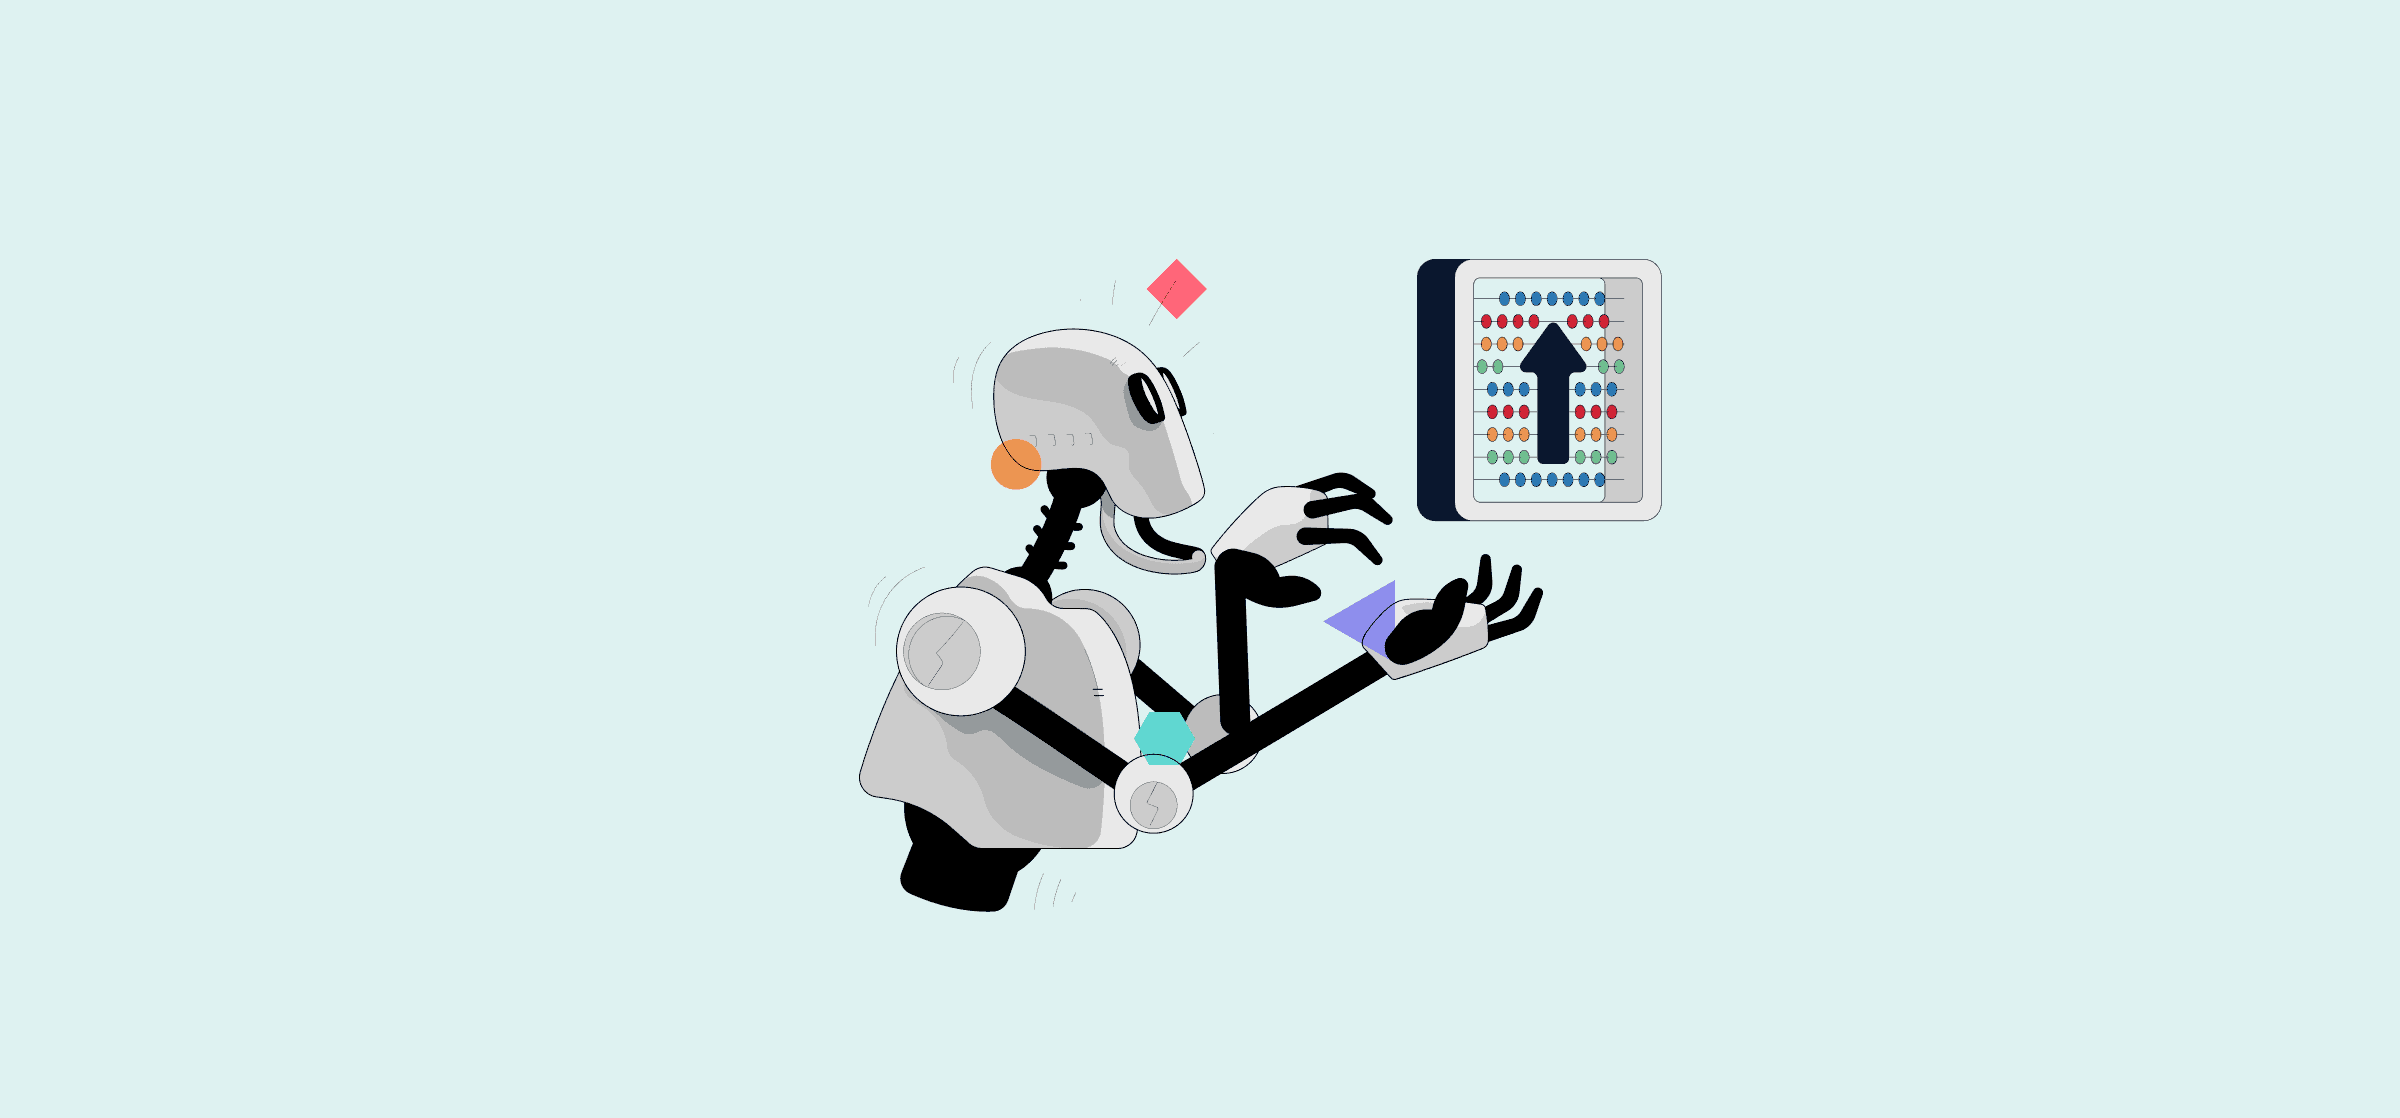 An illustration of a robot with an abacus.